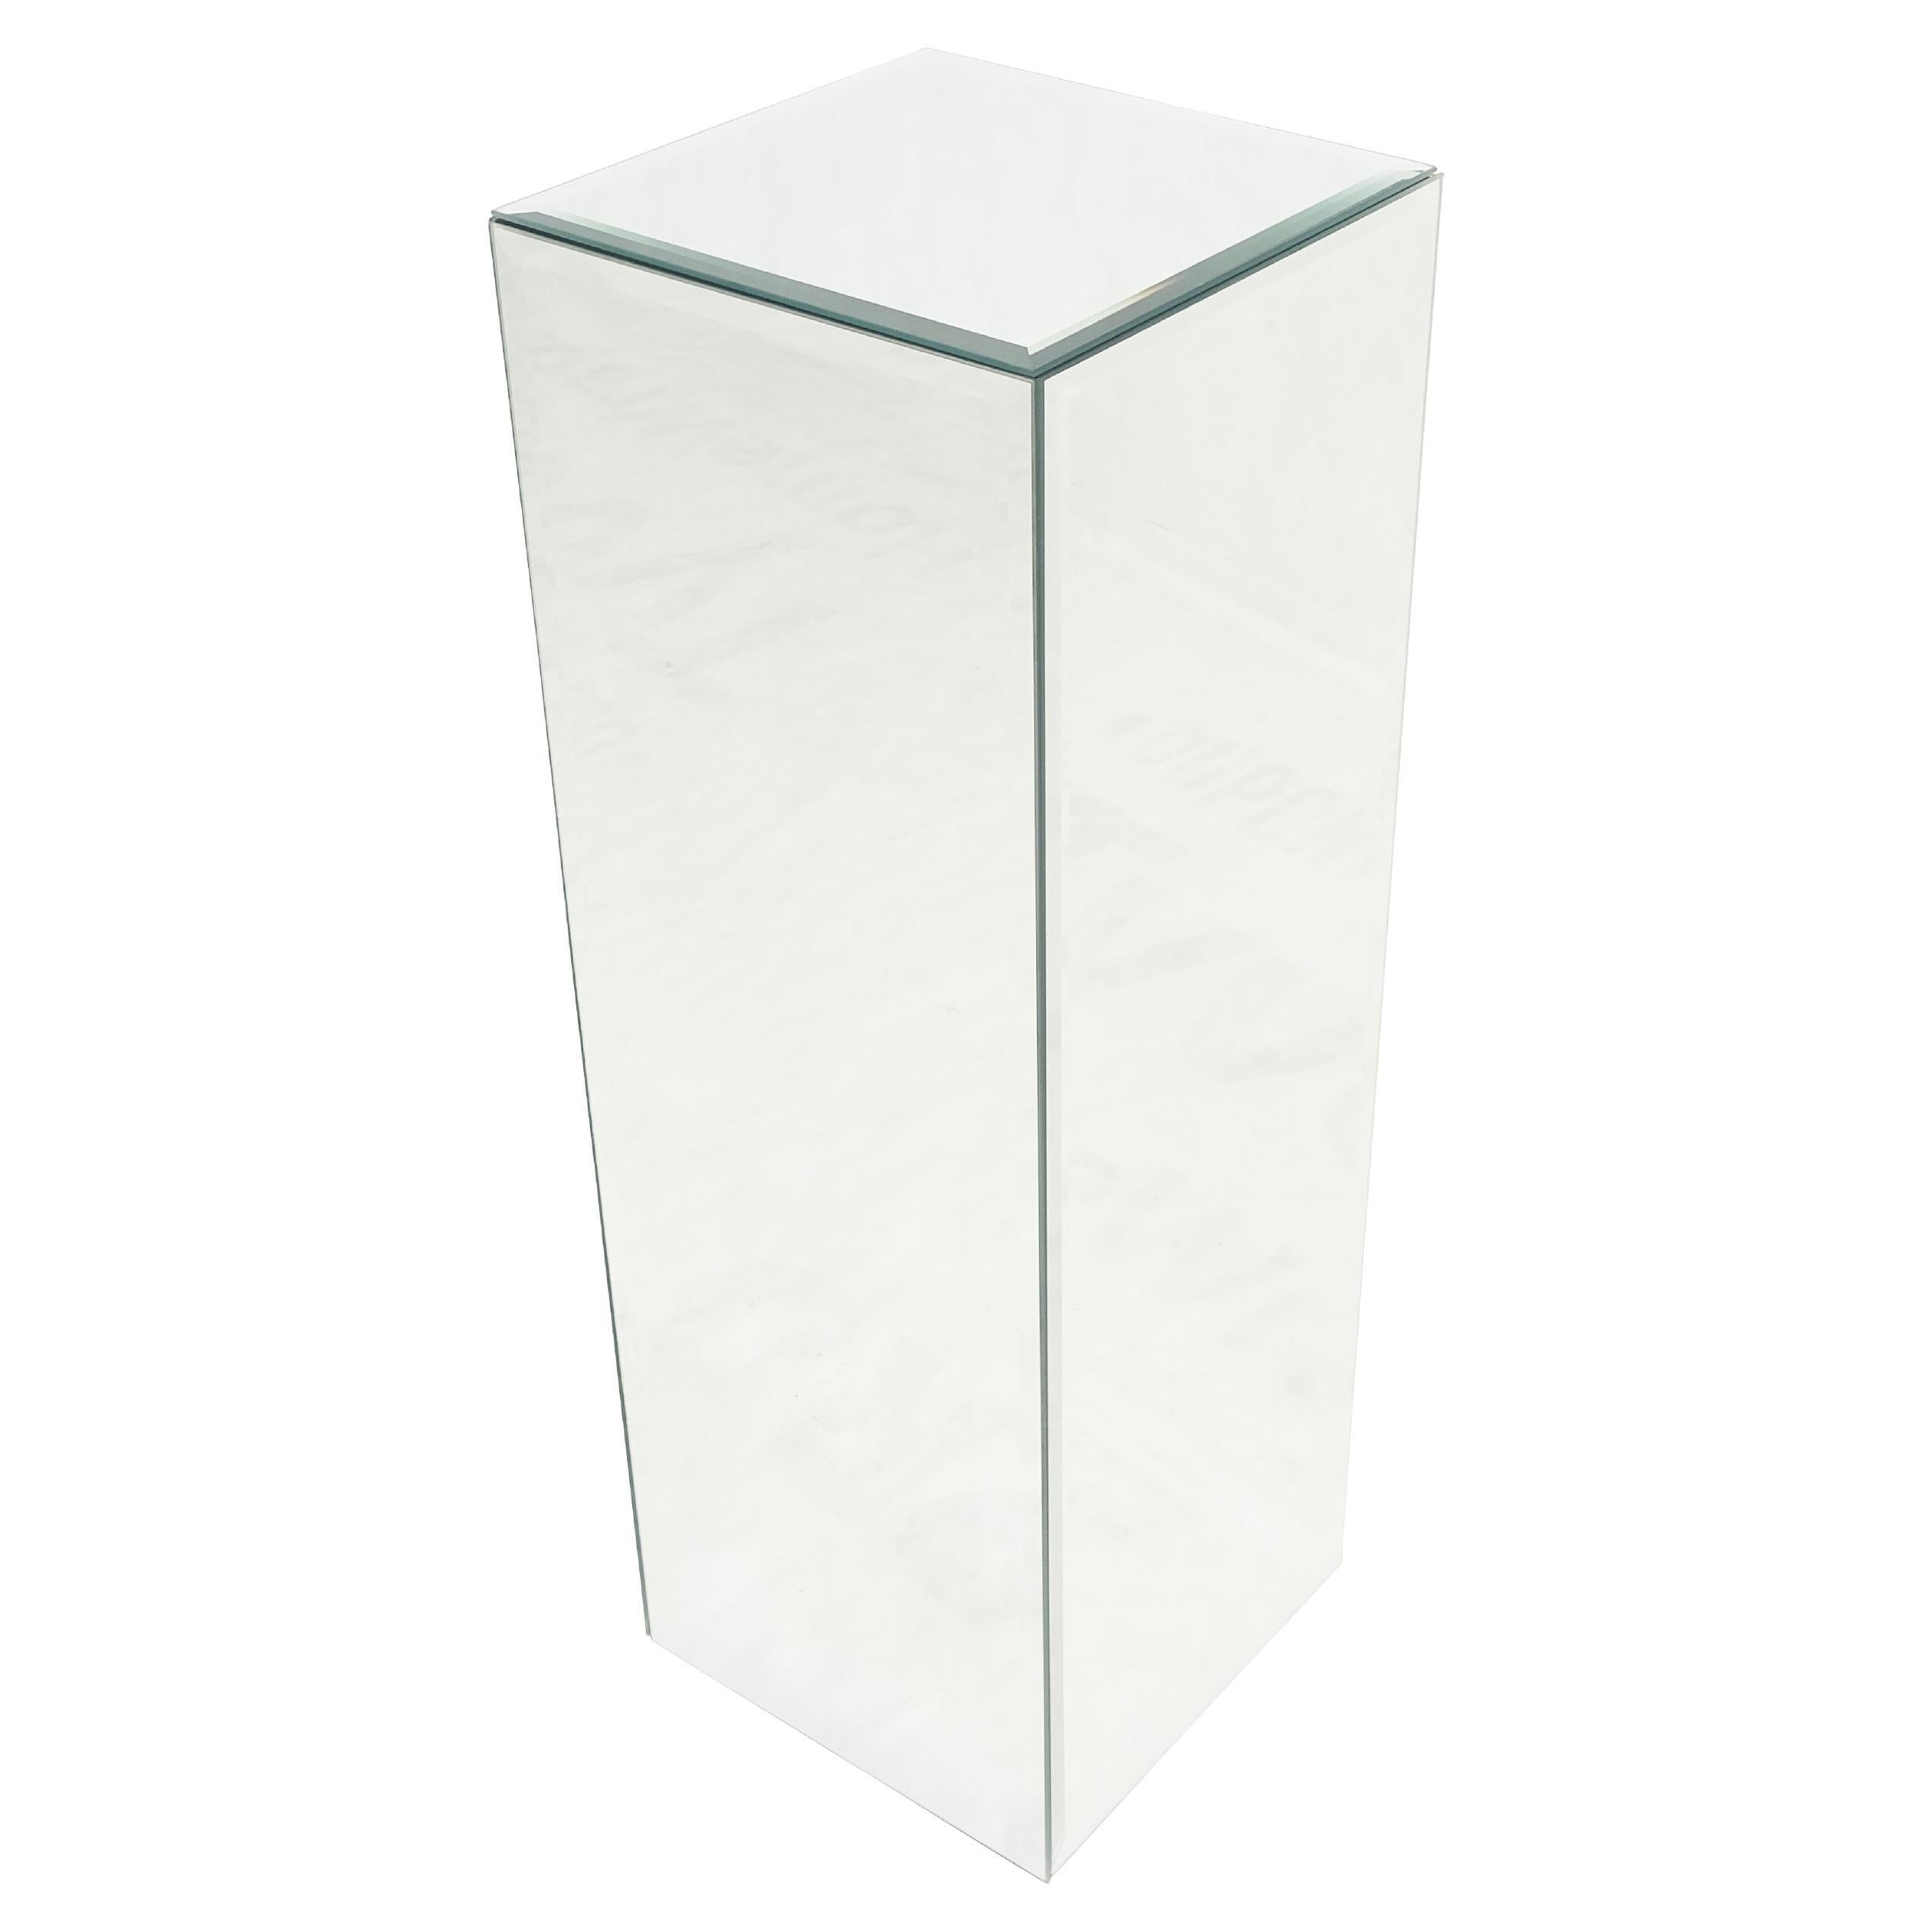 C1970s 12x12 Square 36" High Cube Shape Beveled Mirror Pedestal Table Stand MINT For Sale